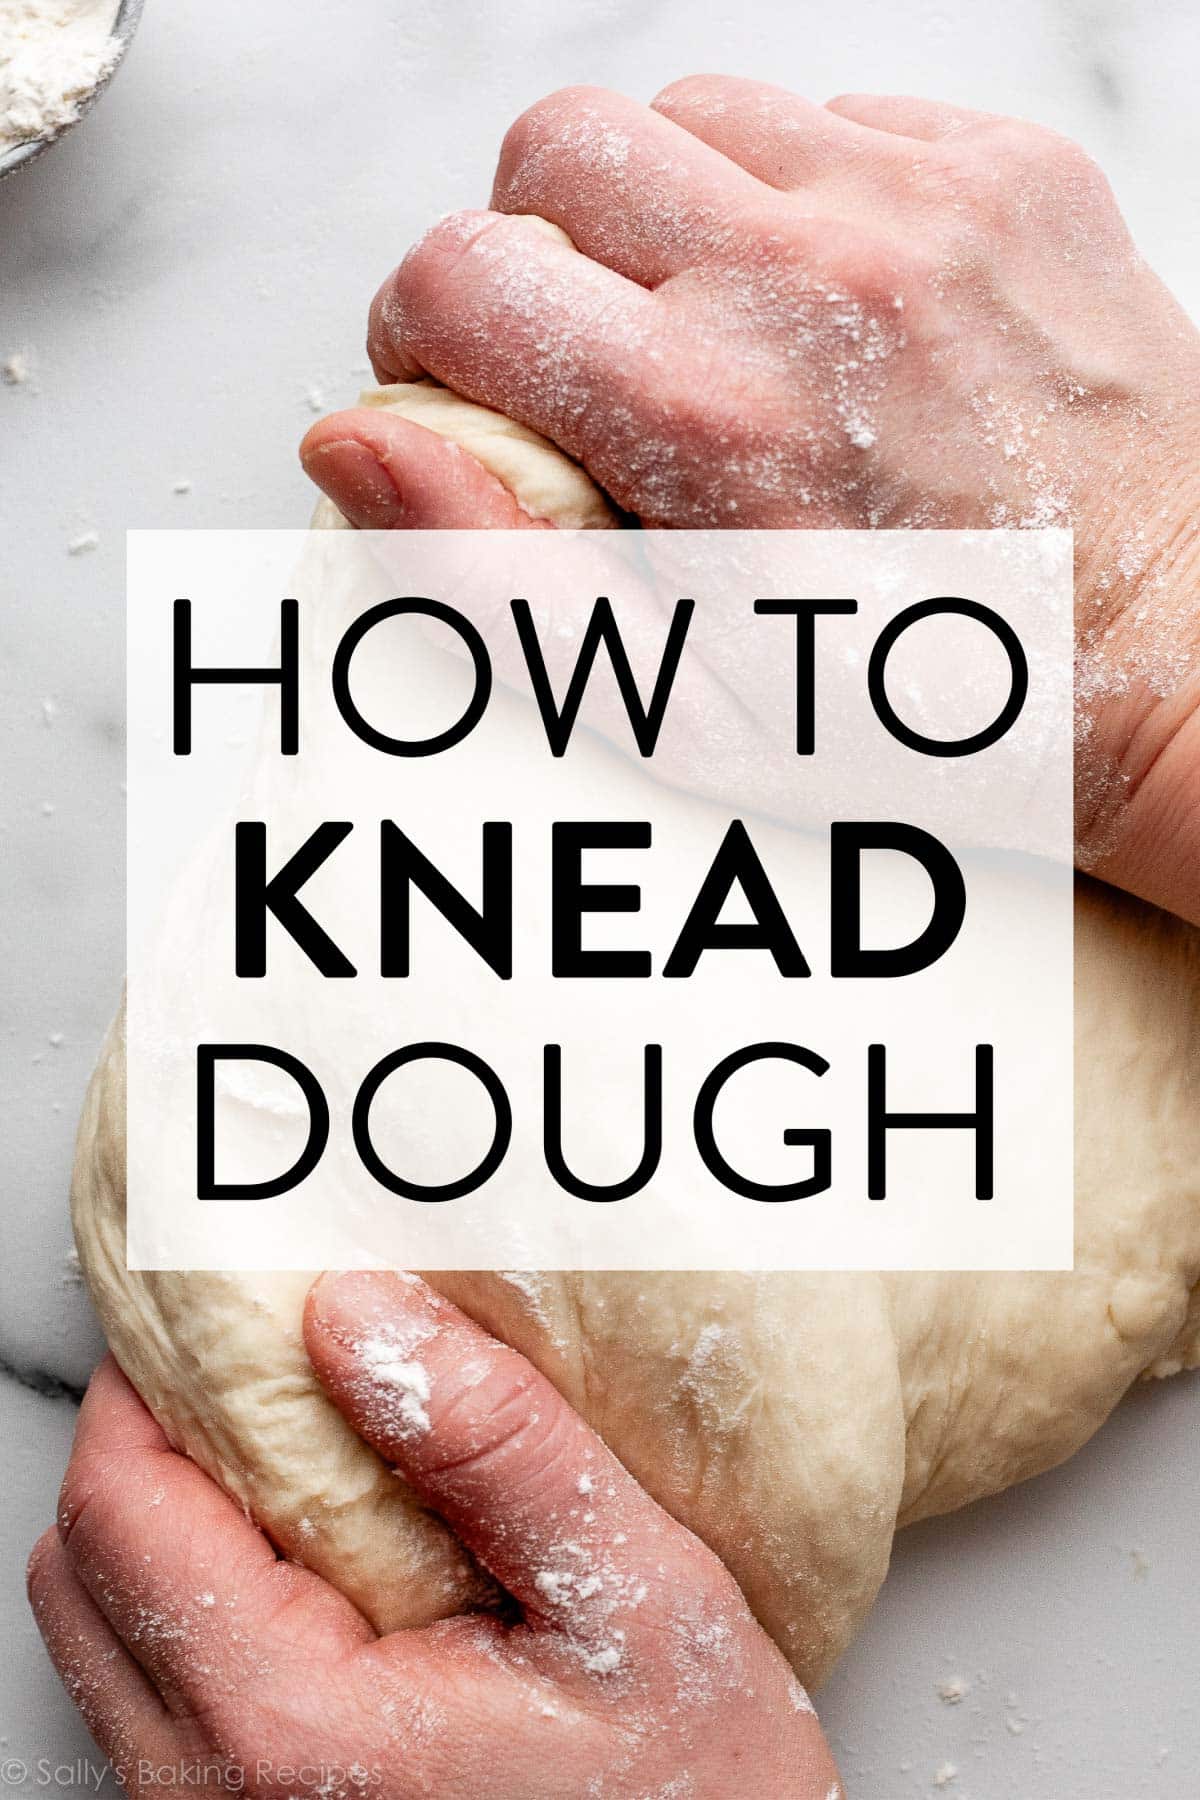 dough in background with text overlay HOW TO KNEAD DOUGH on top.